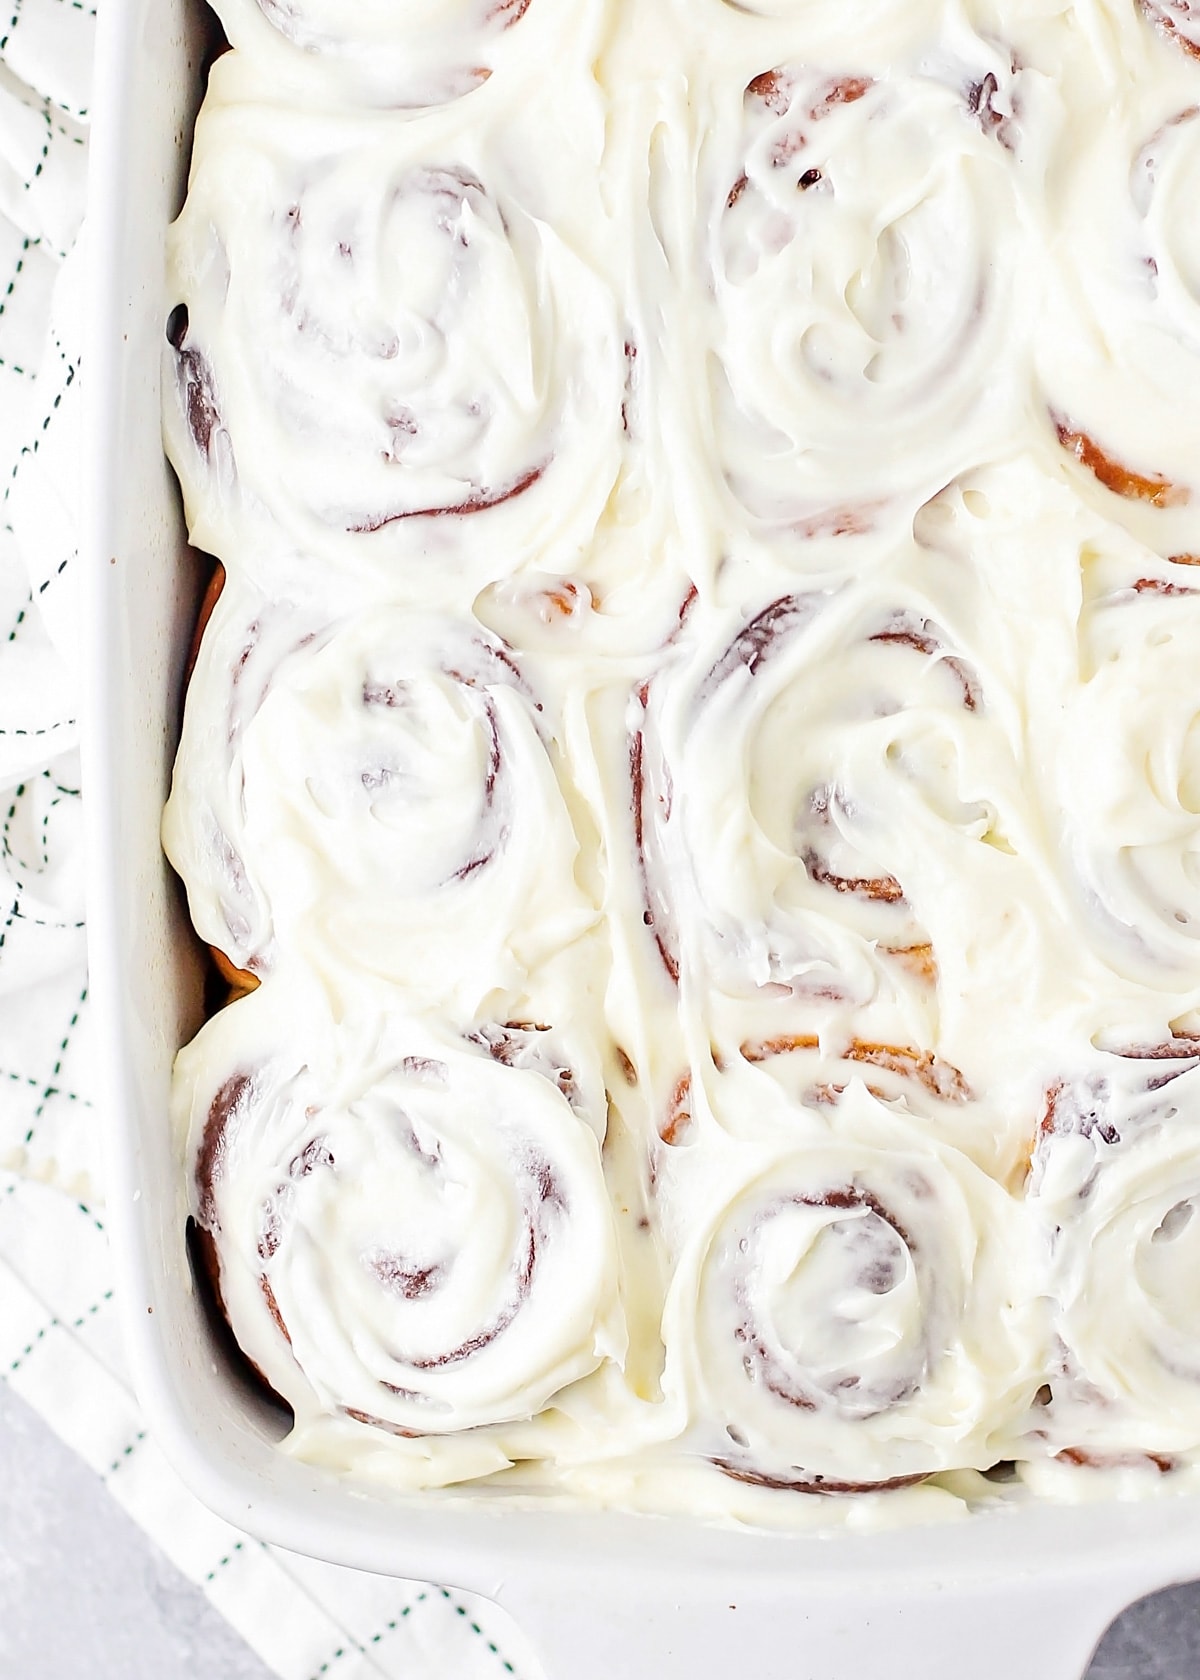 Homemade cinnamon rolls frosted and in baking dish.